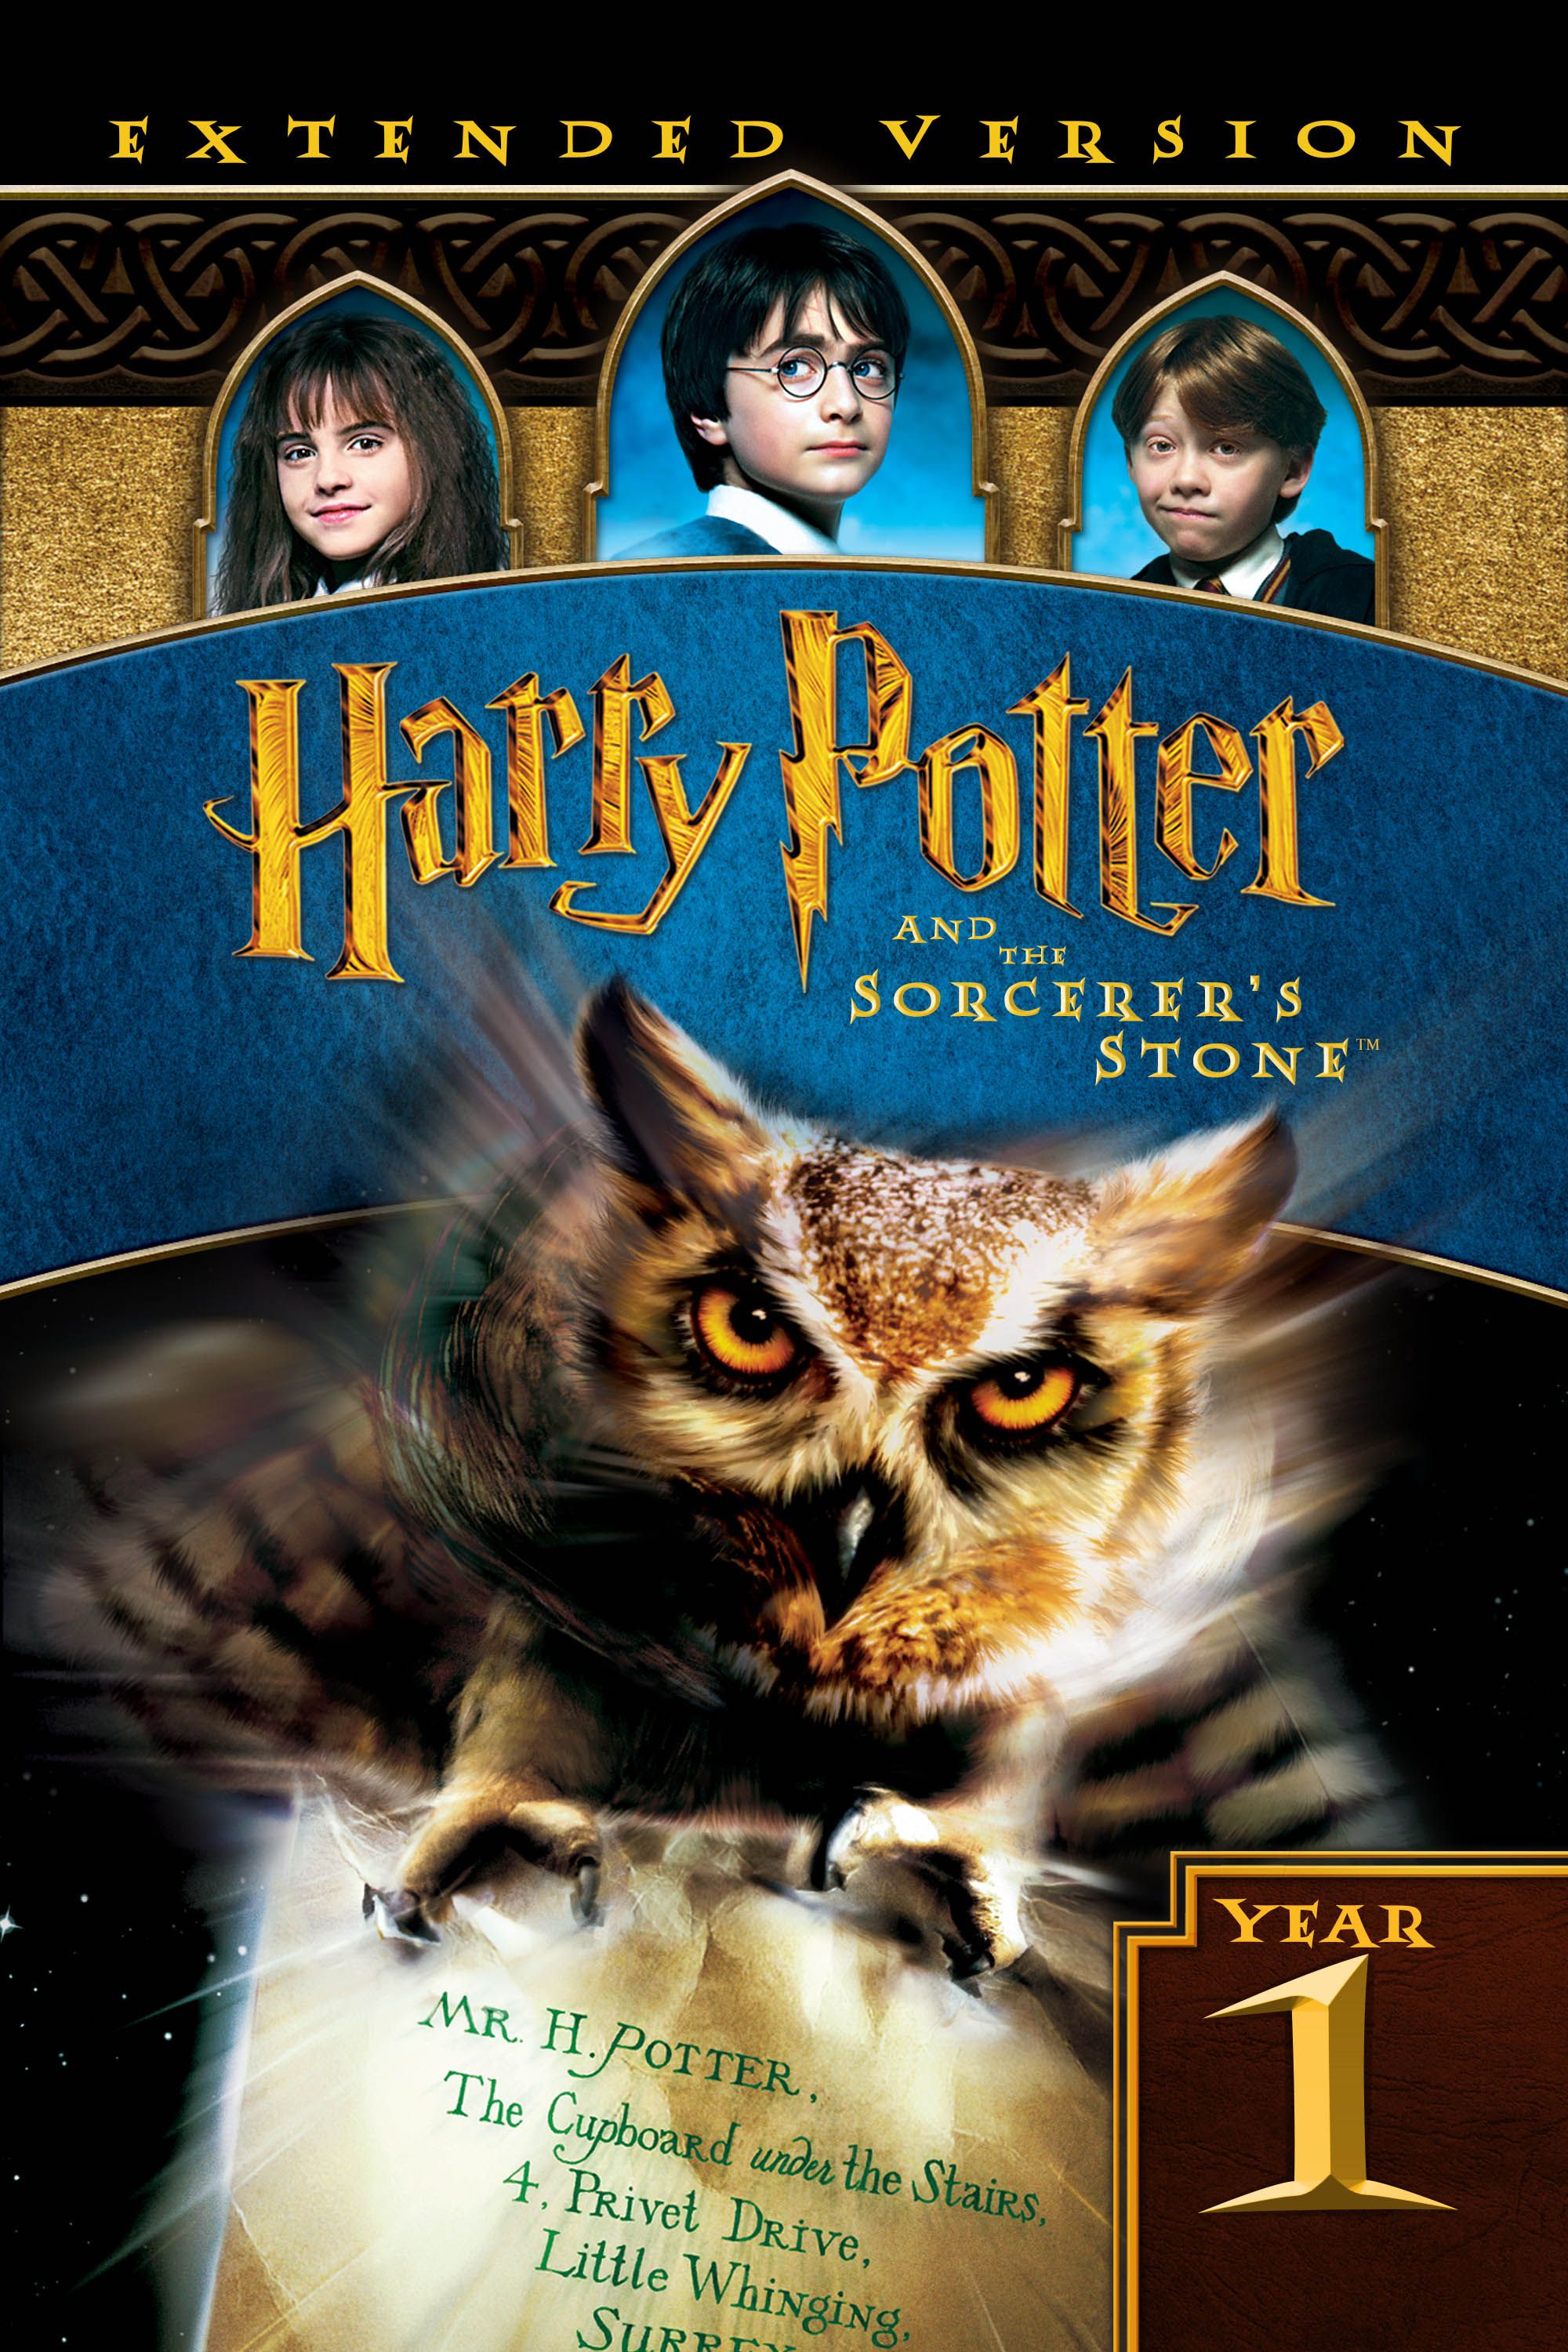 Harry potter and the sorcerer's stone